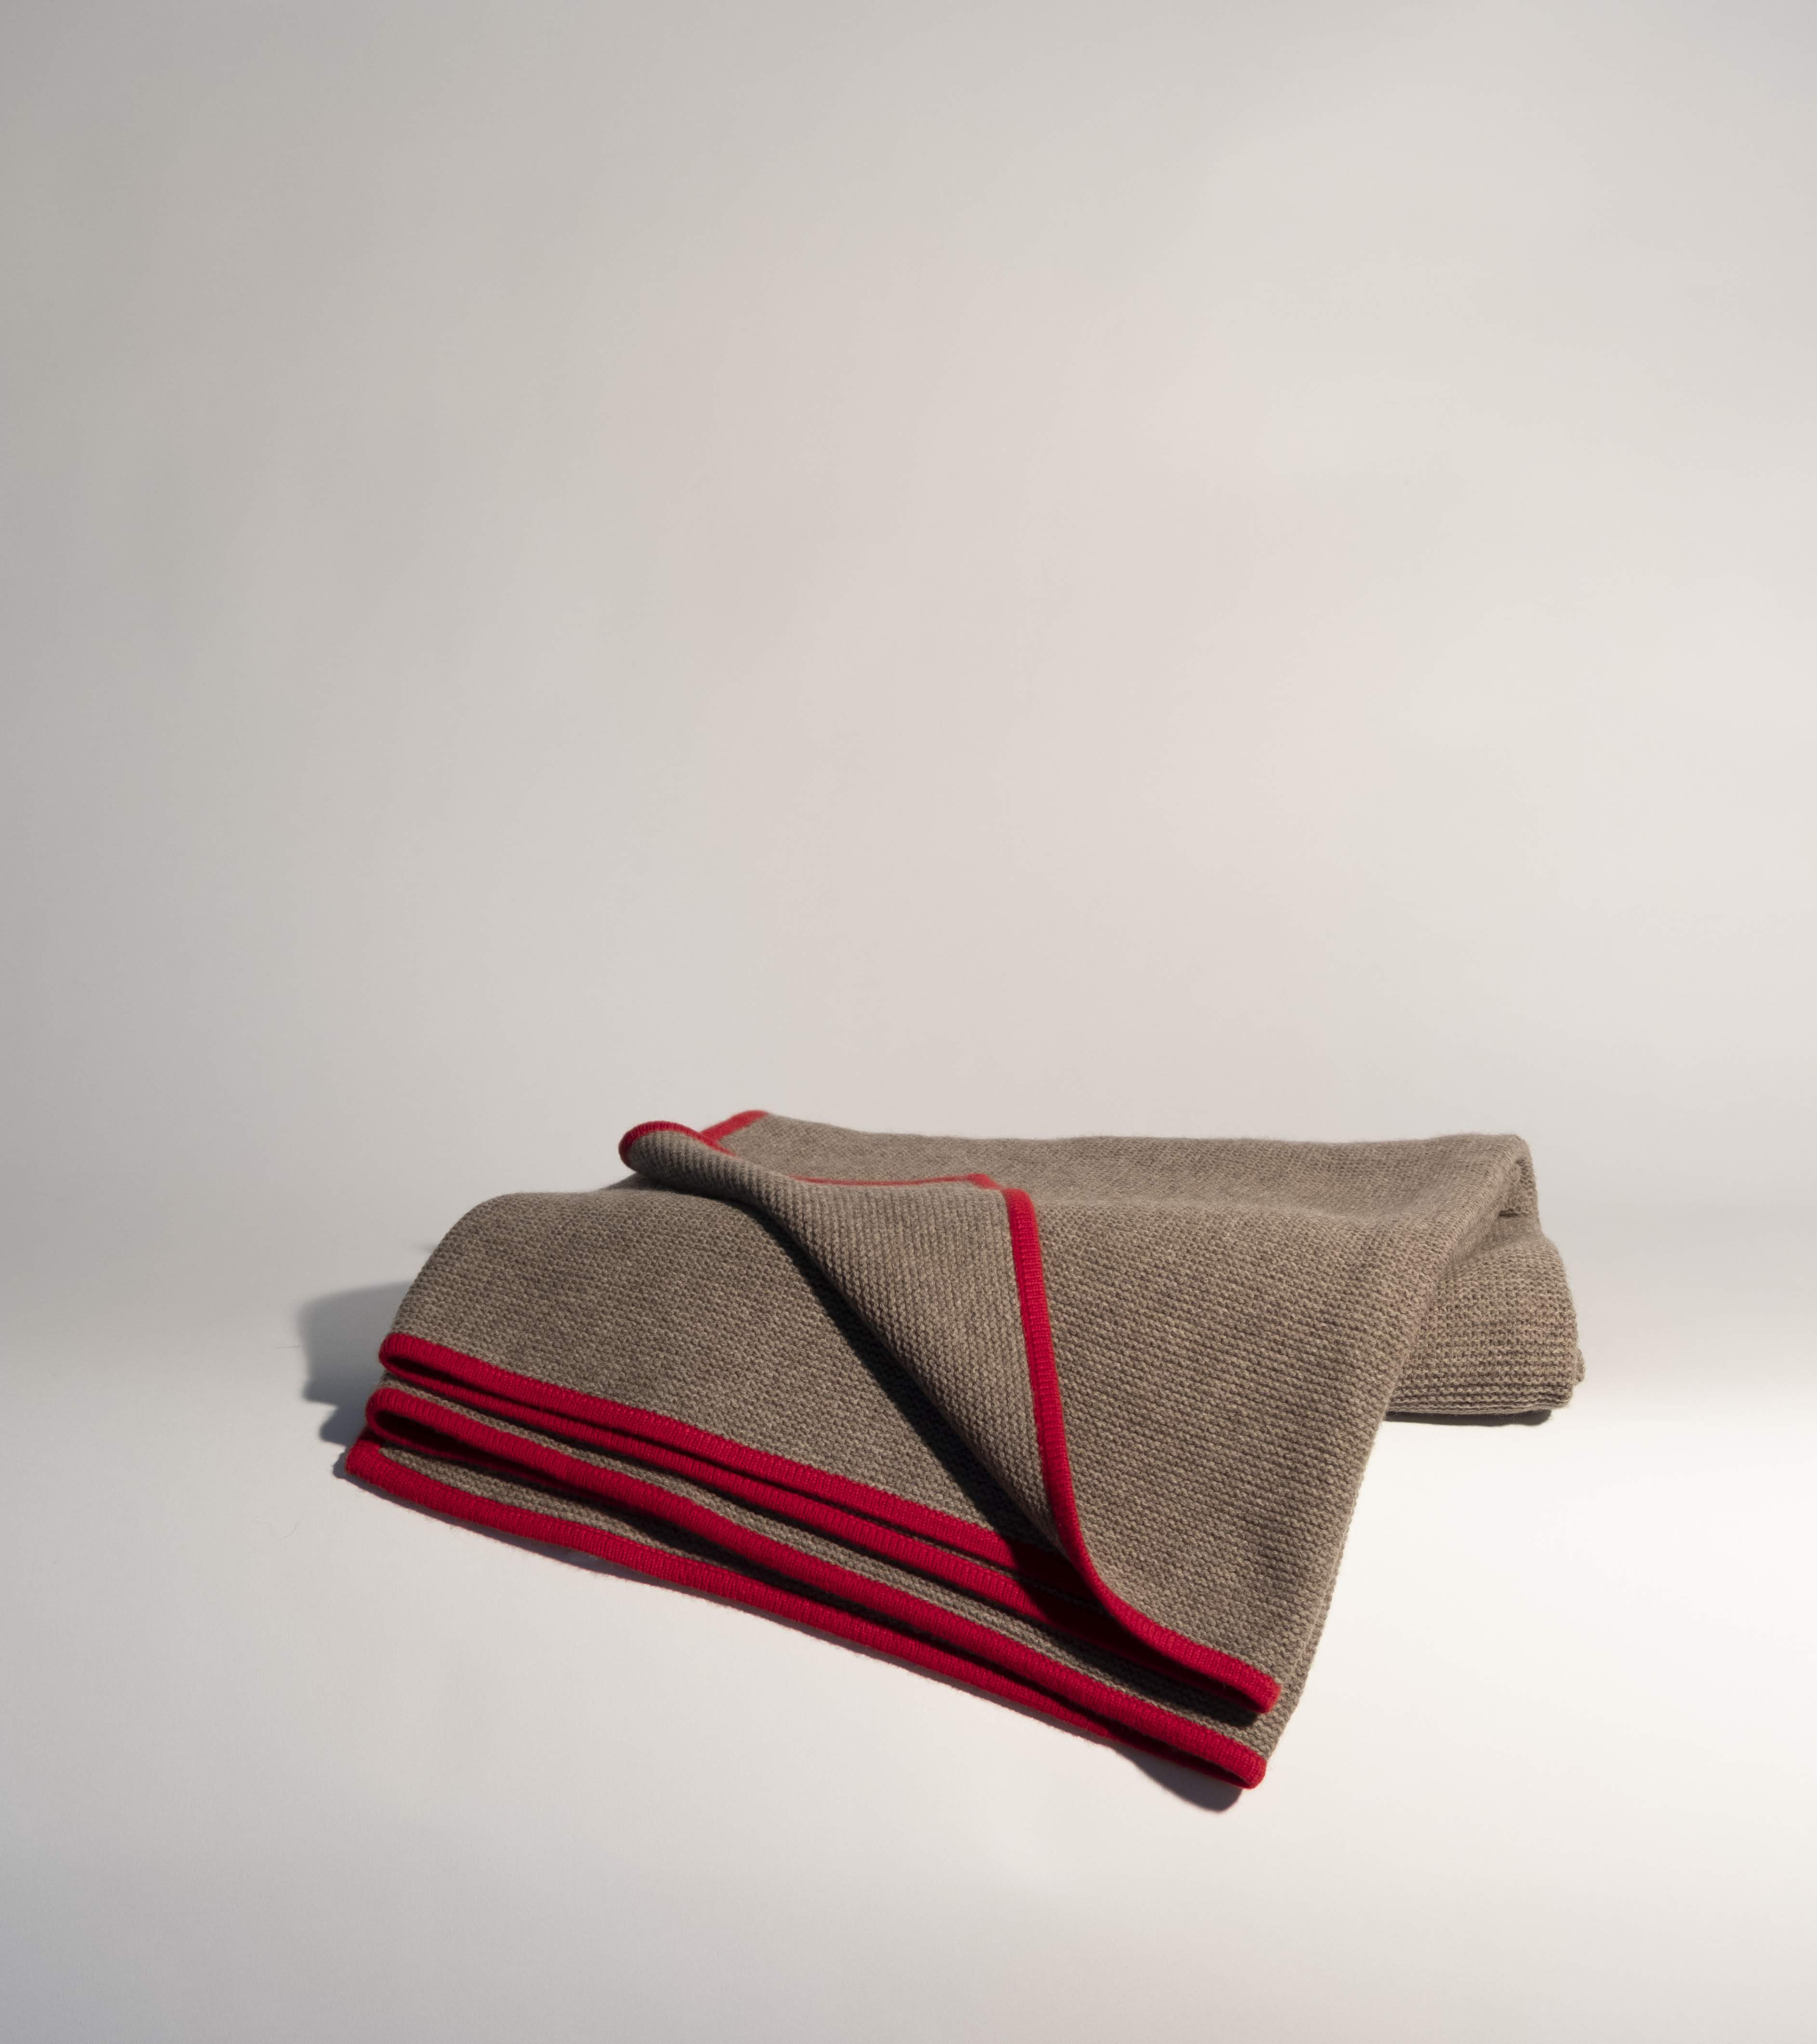 Hangai Mountain Textiles Purl Knit Yak Down Throw with Red Cashmere Border